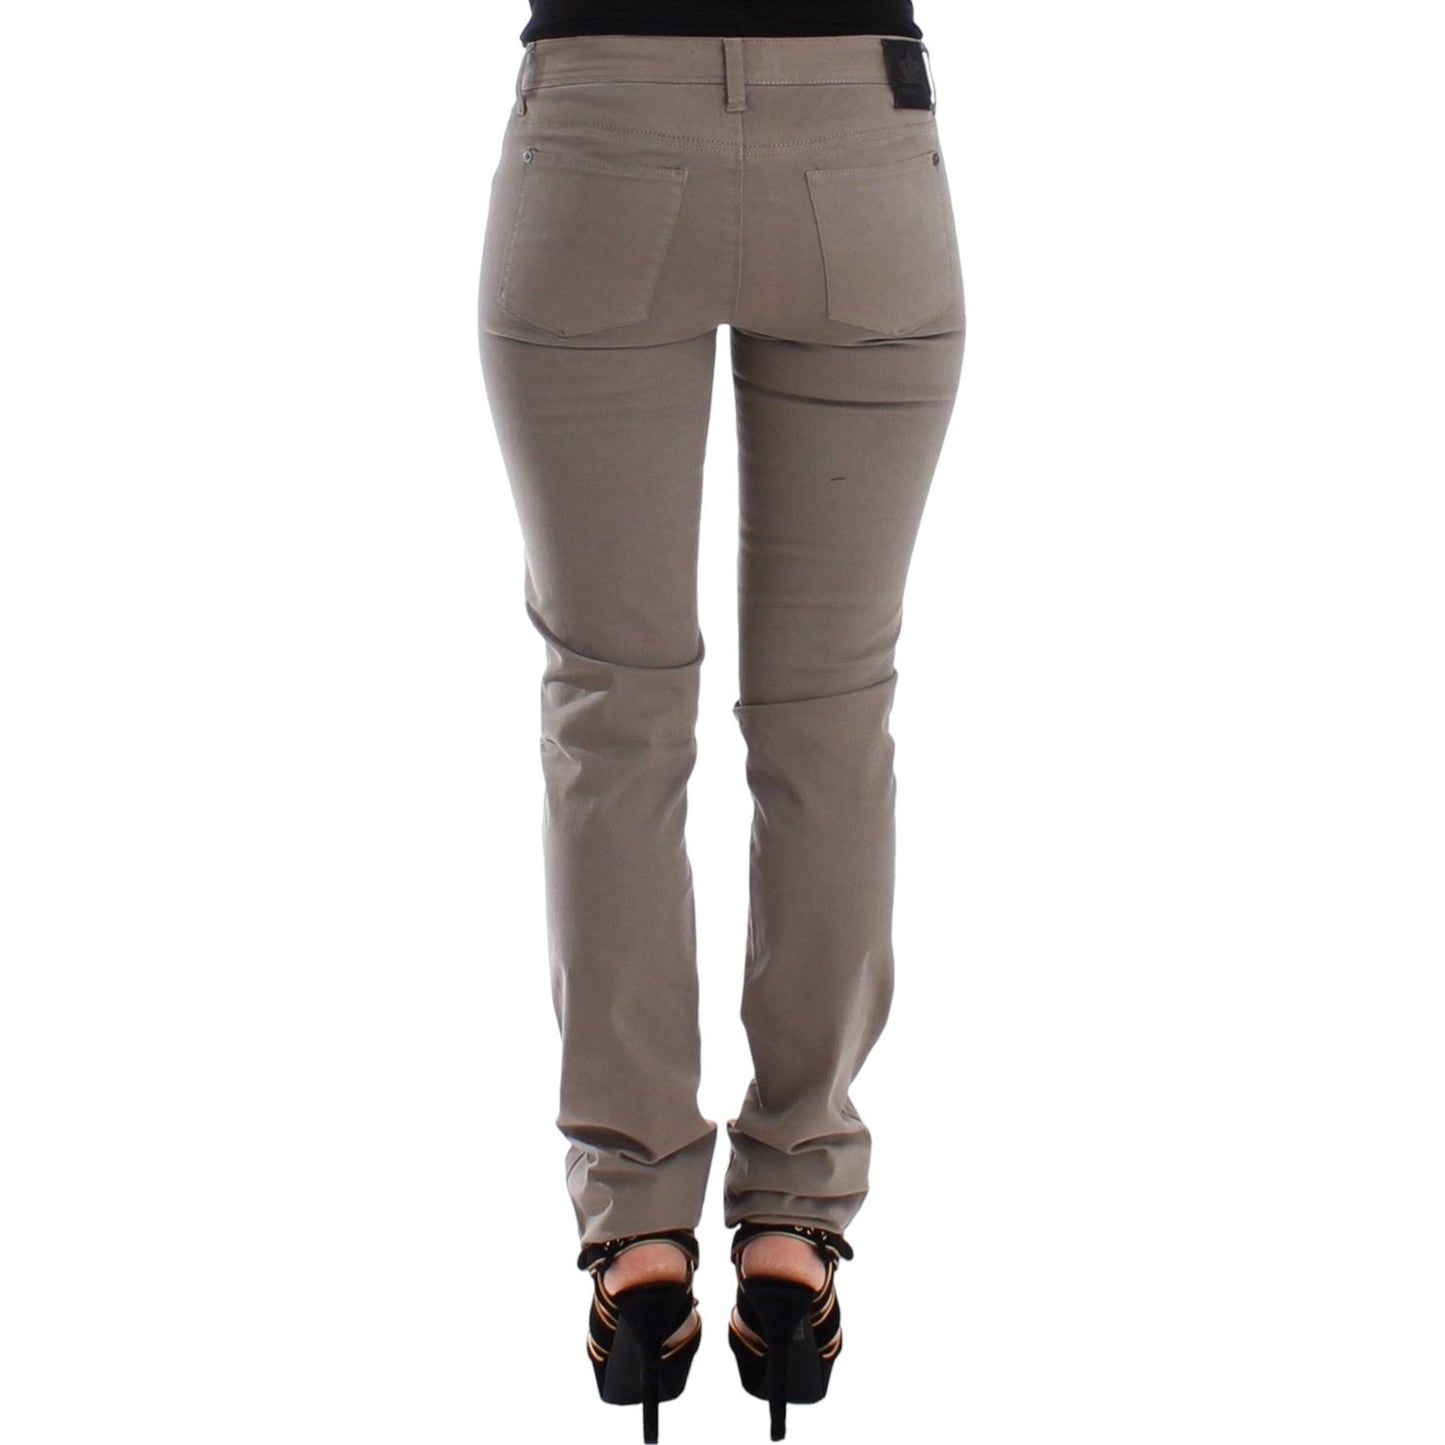 Ermanno Scervino Chic Taupe Skinny Jeans for Elevated Style taupe-beige-slim-jeans-denim-pants-skinny